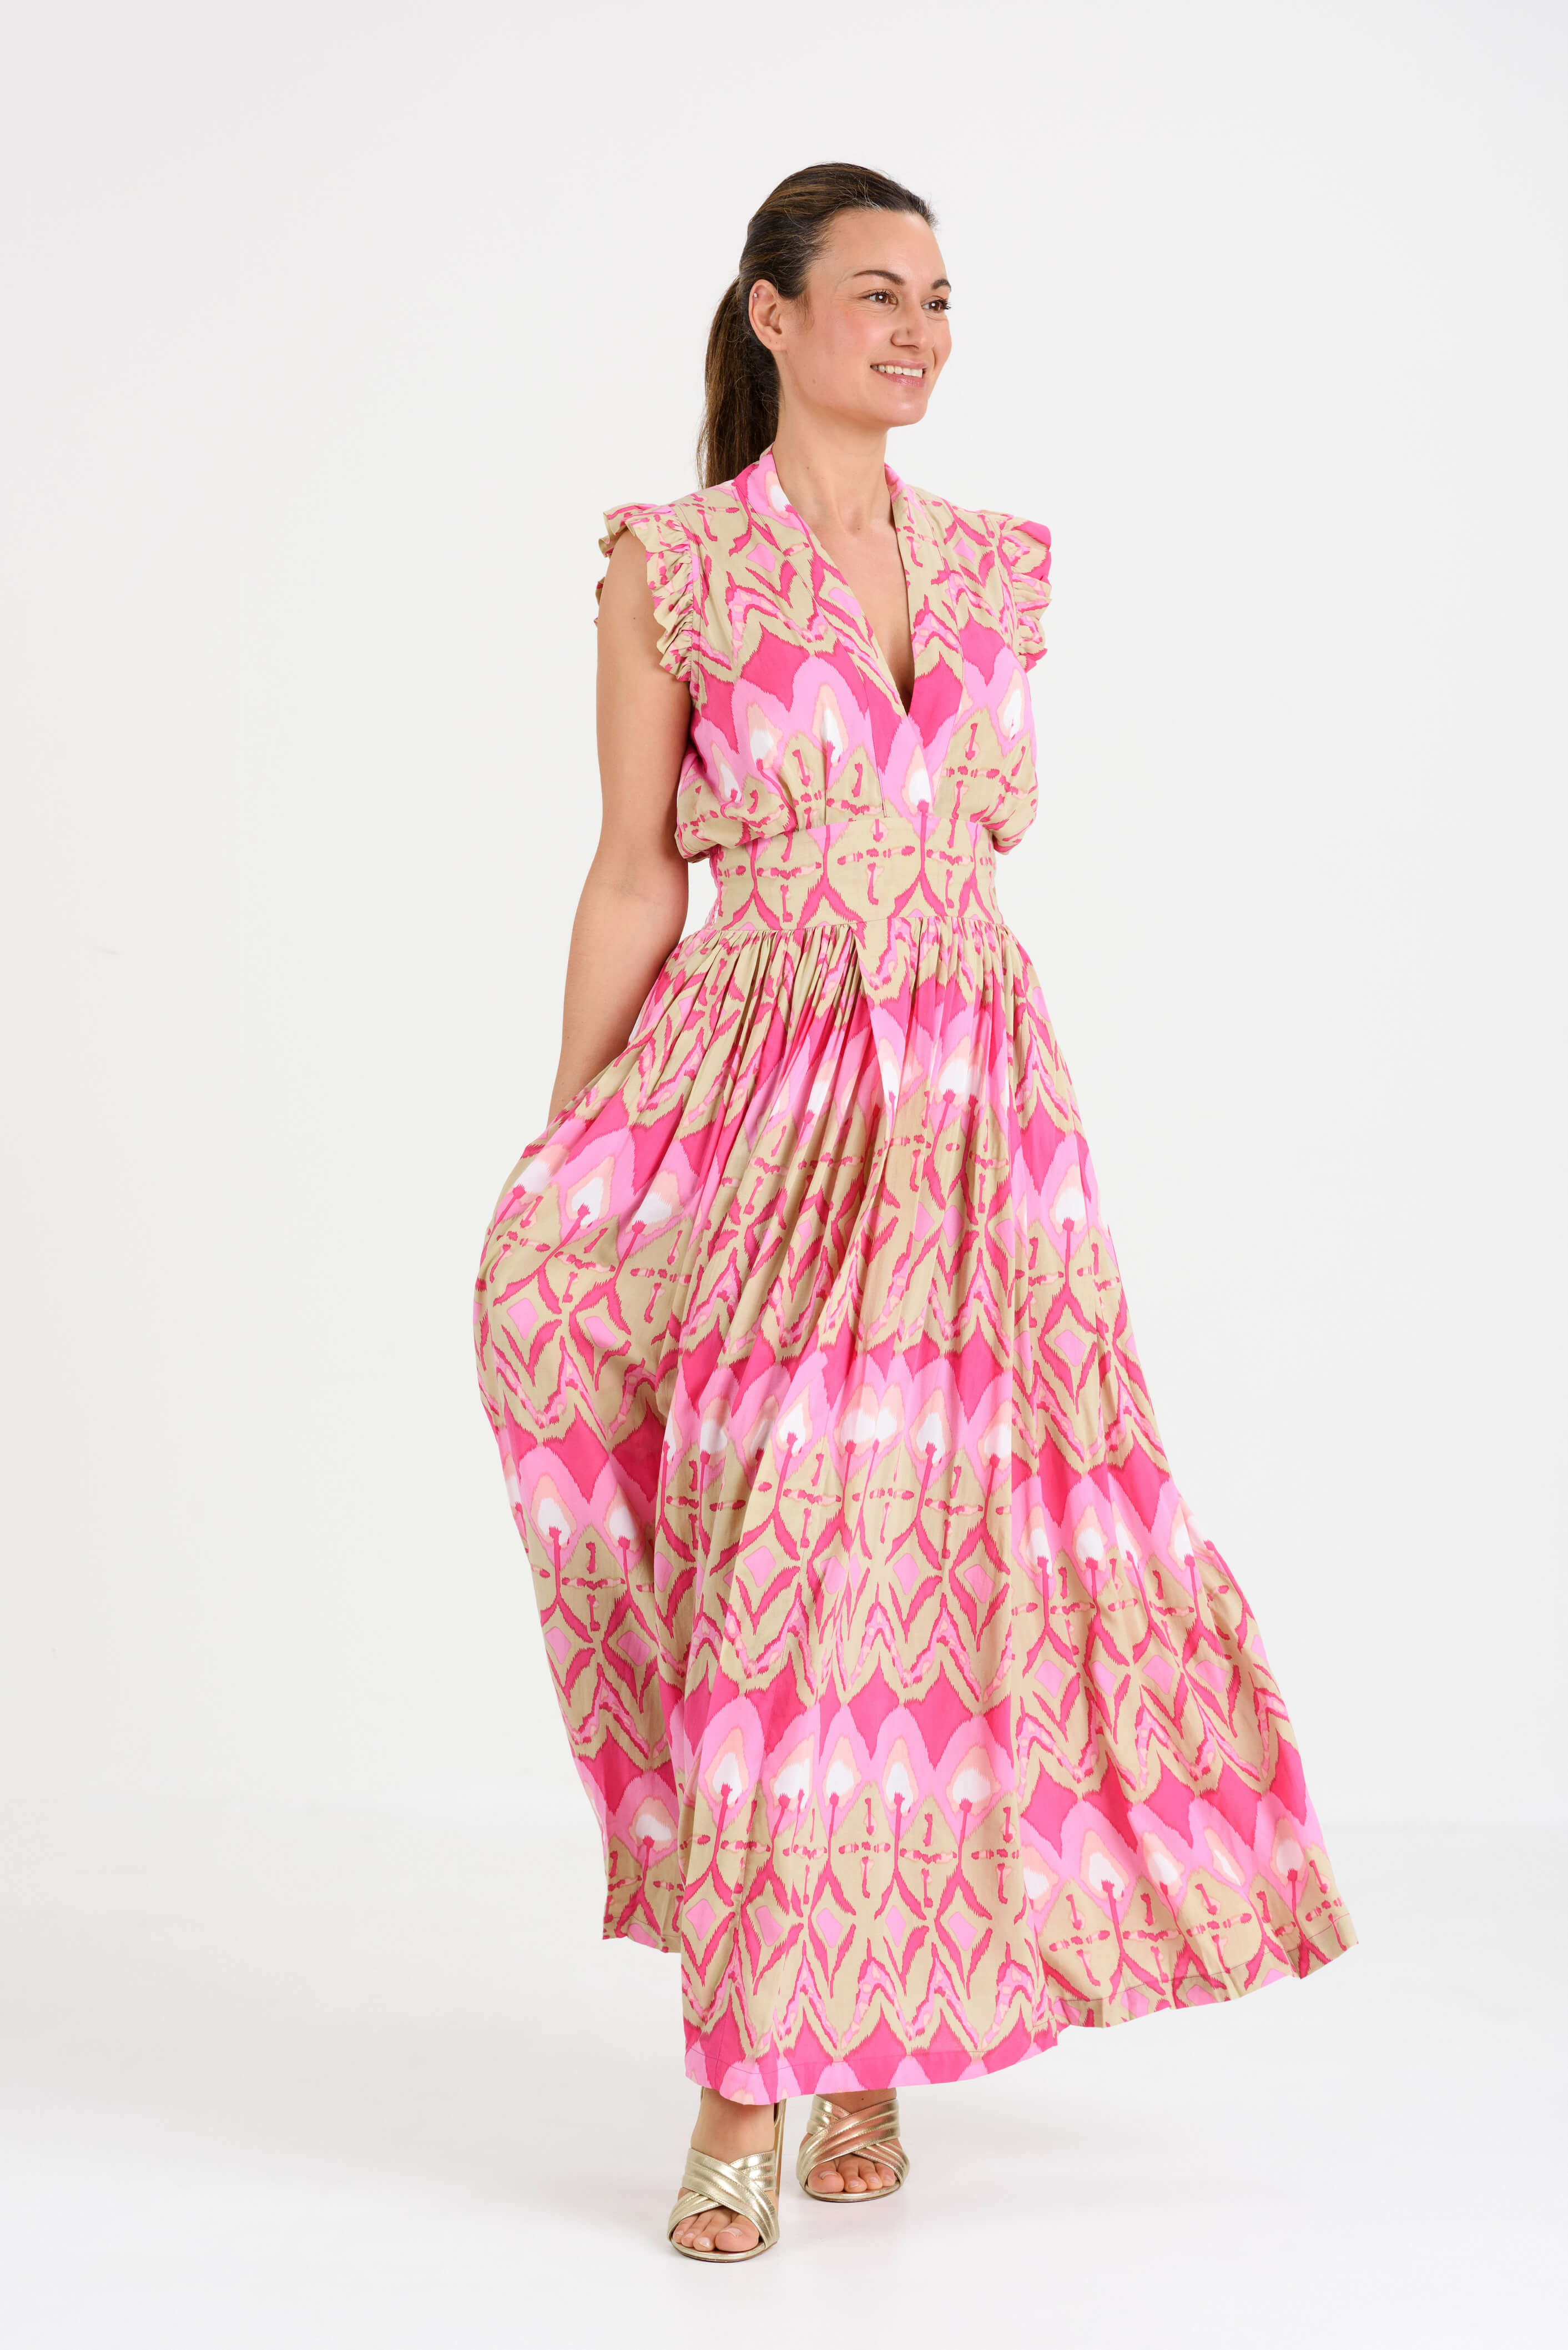 Feather and Find pink maxi dress 